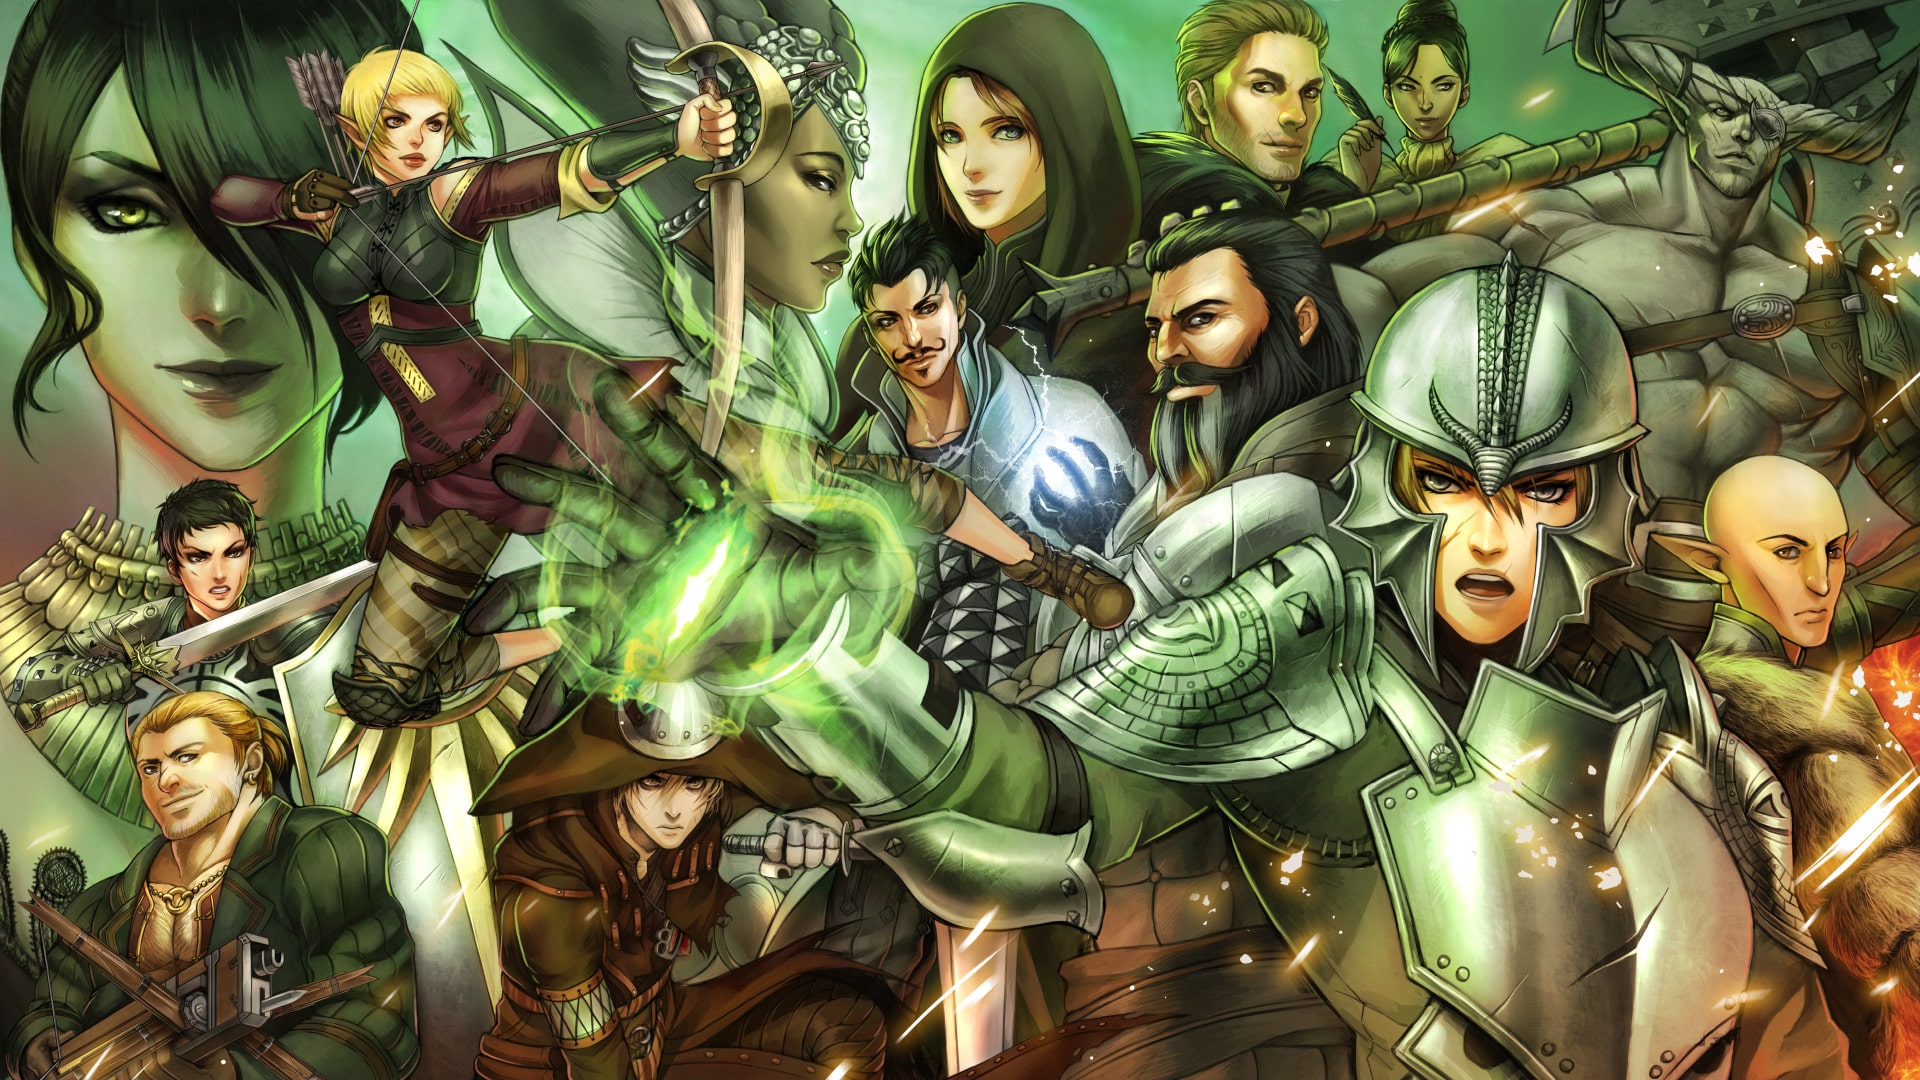 Dragon Age Inquisition Cast of Characters Artwork PS4 Xbox One PC